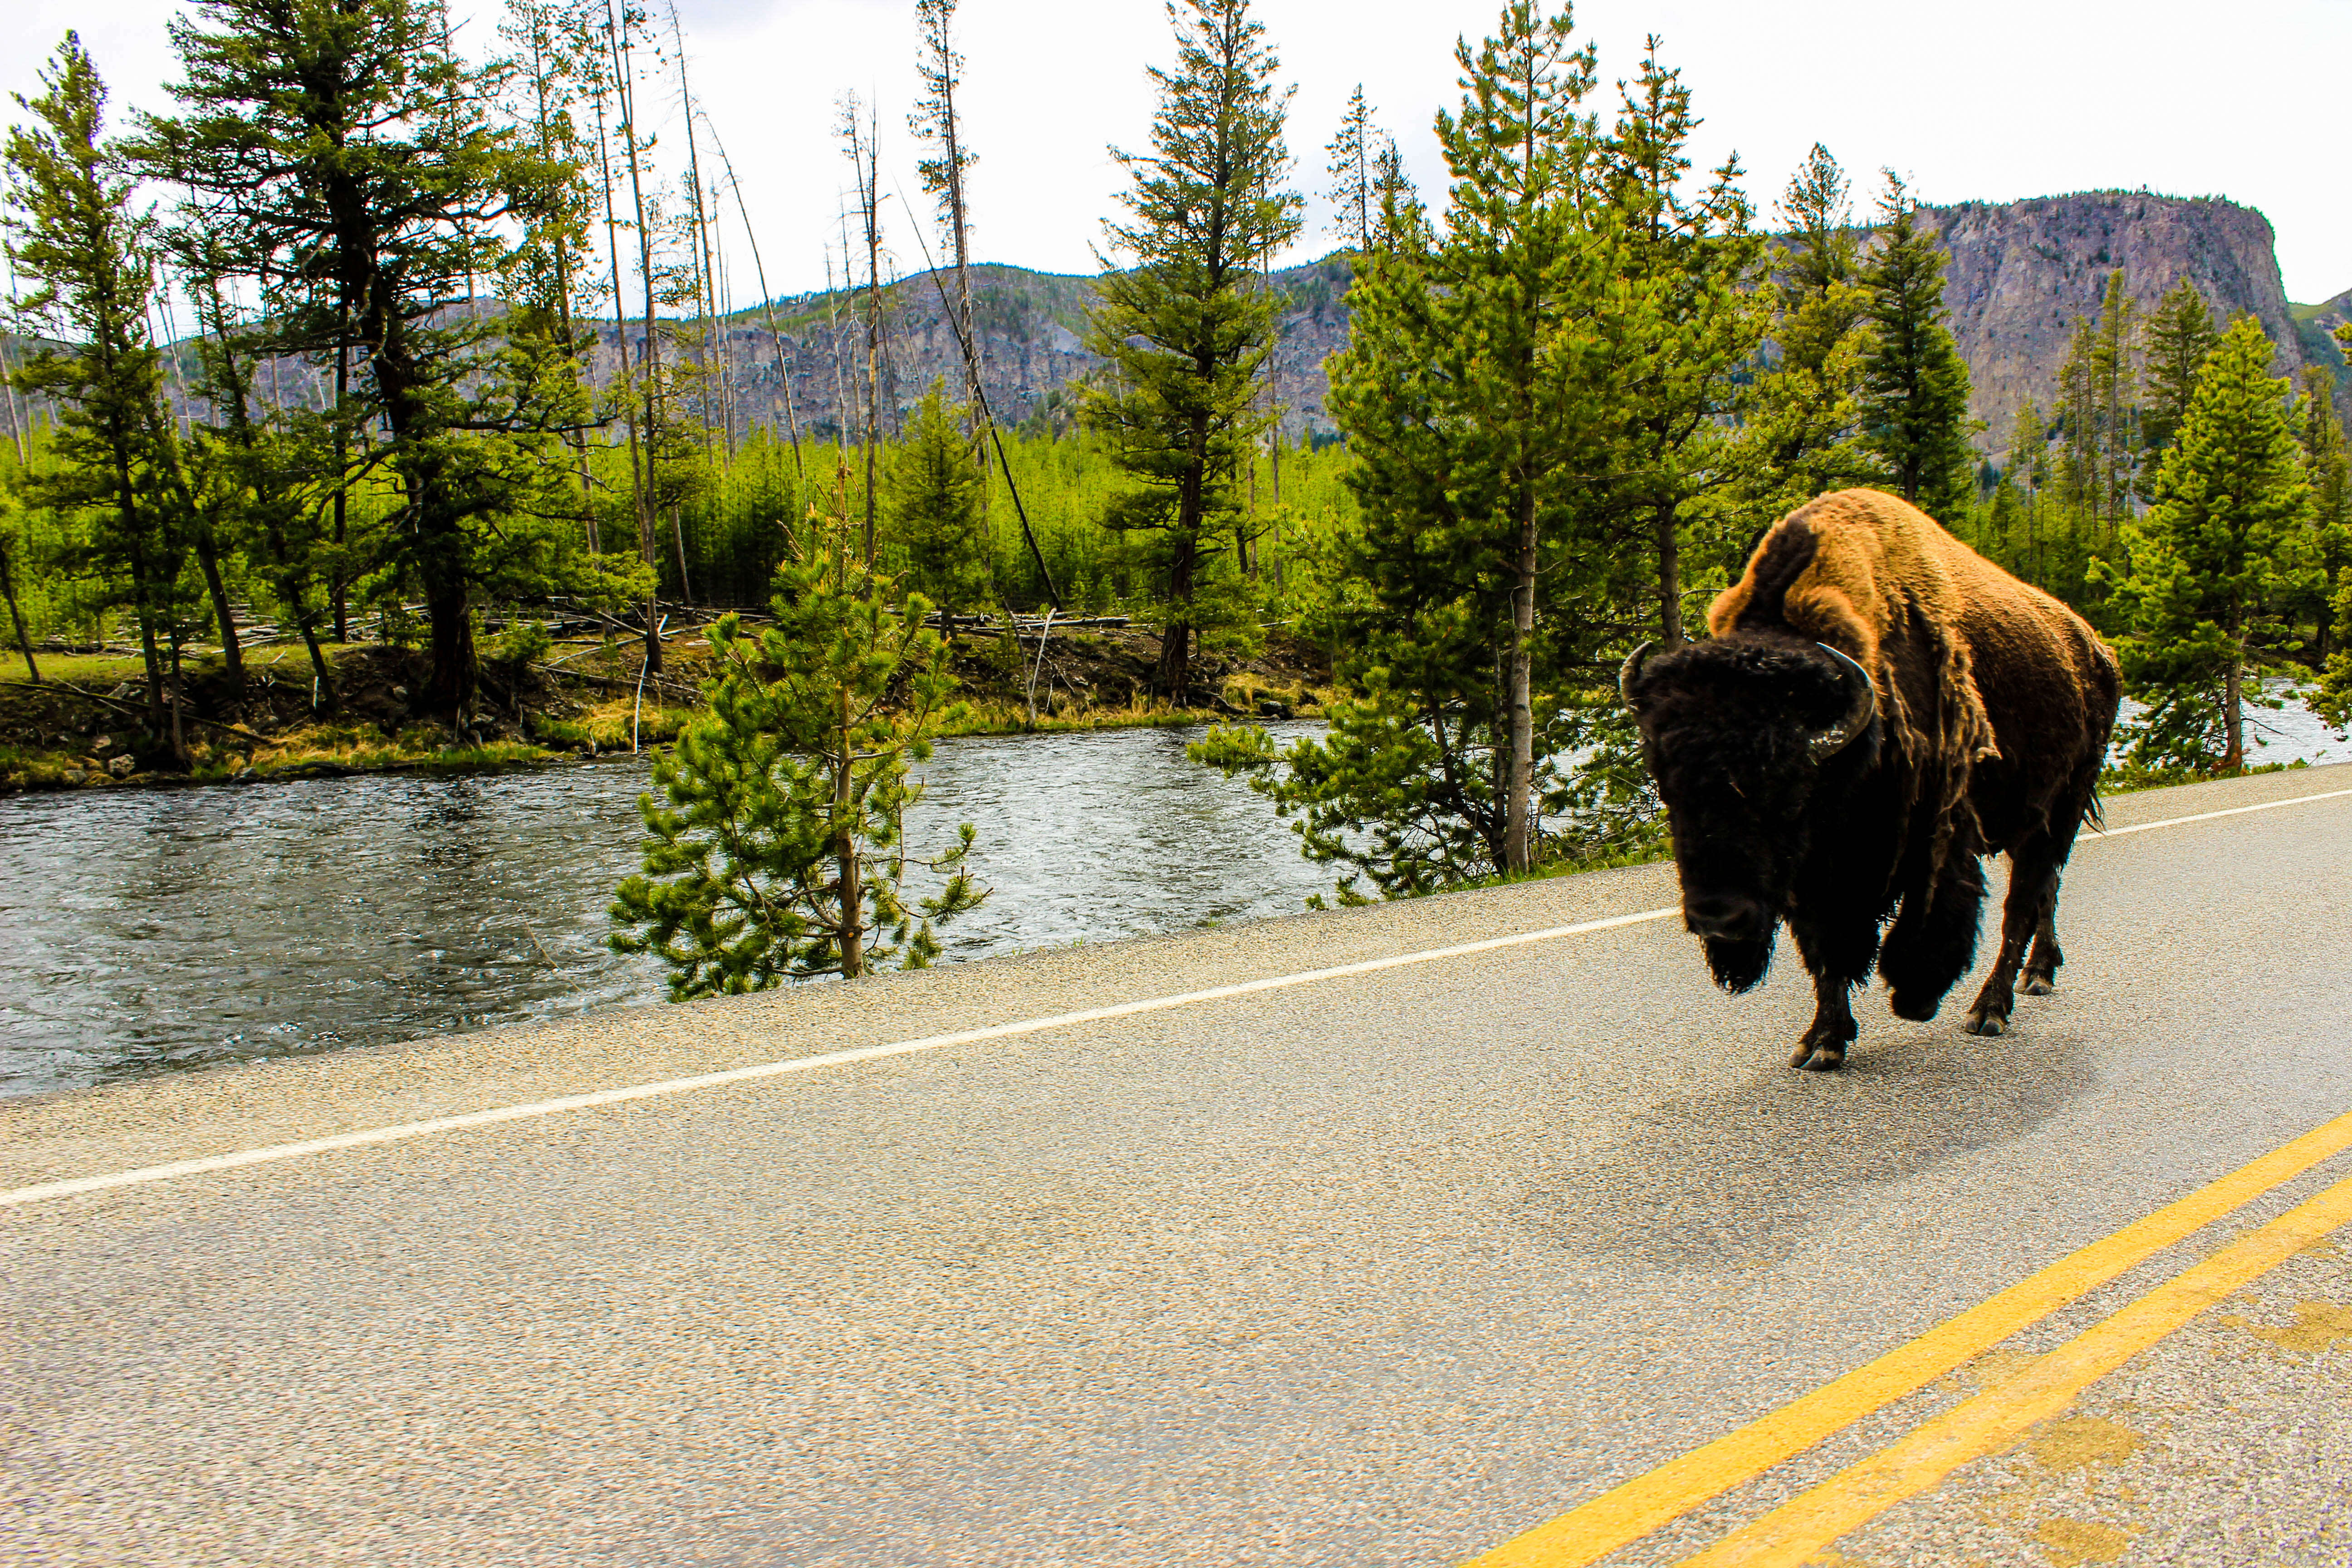 Image of American Bison